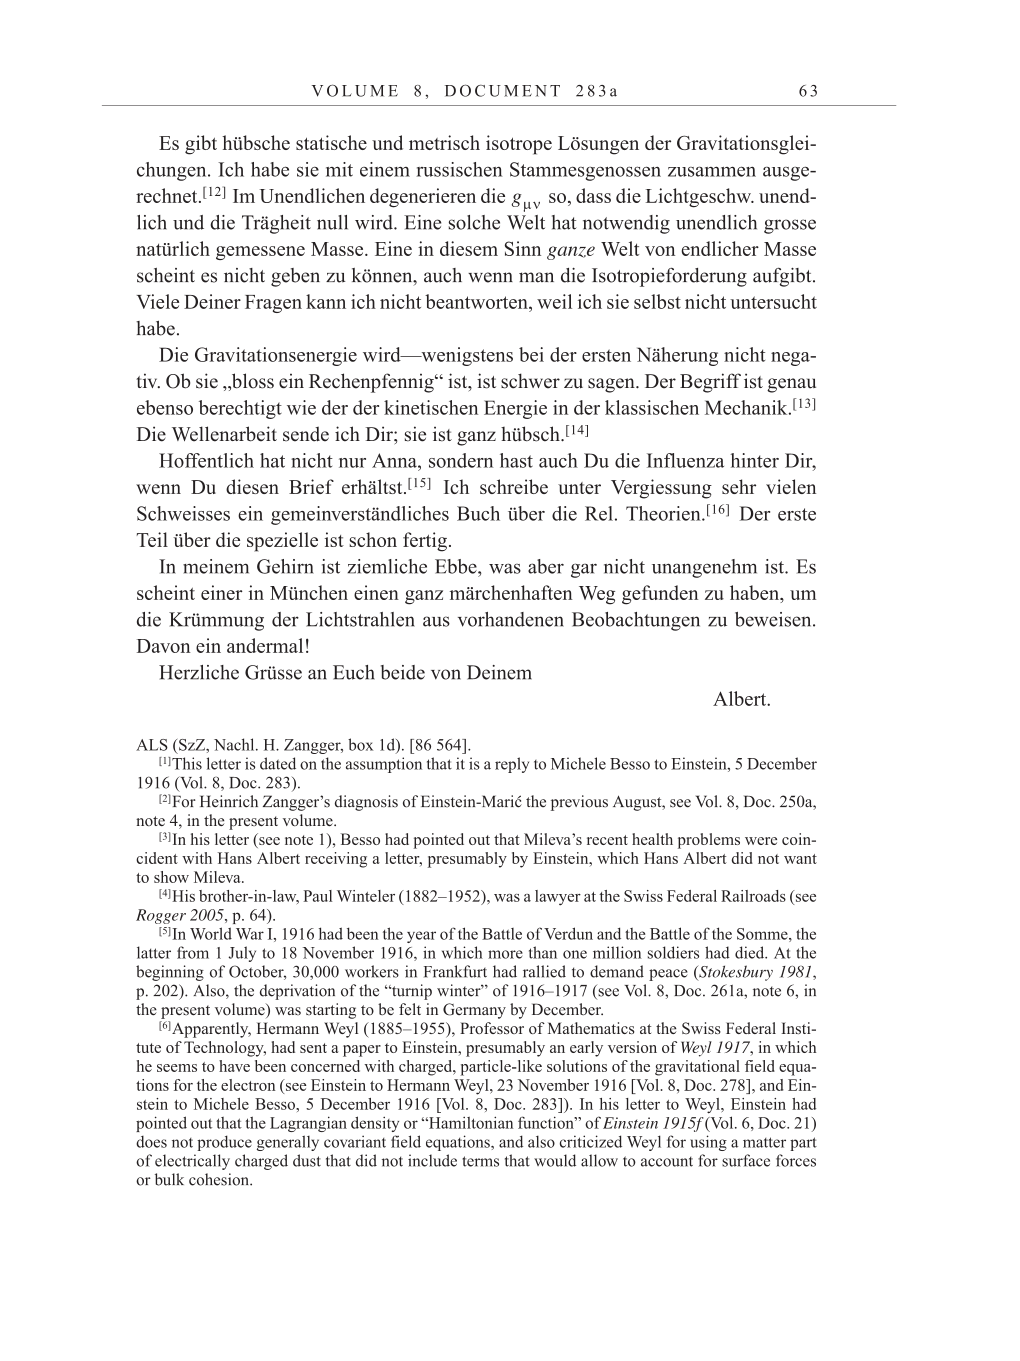 Volume 10: The Berlin Years: Correspondence May-December 1920 / Supplementary Correspondence 1909-1920 page 63